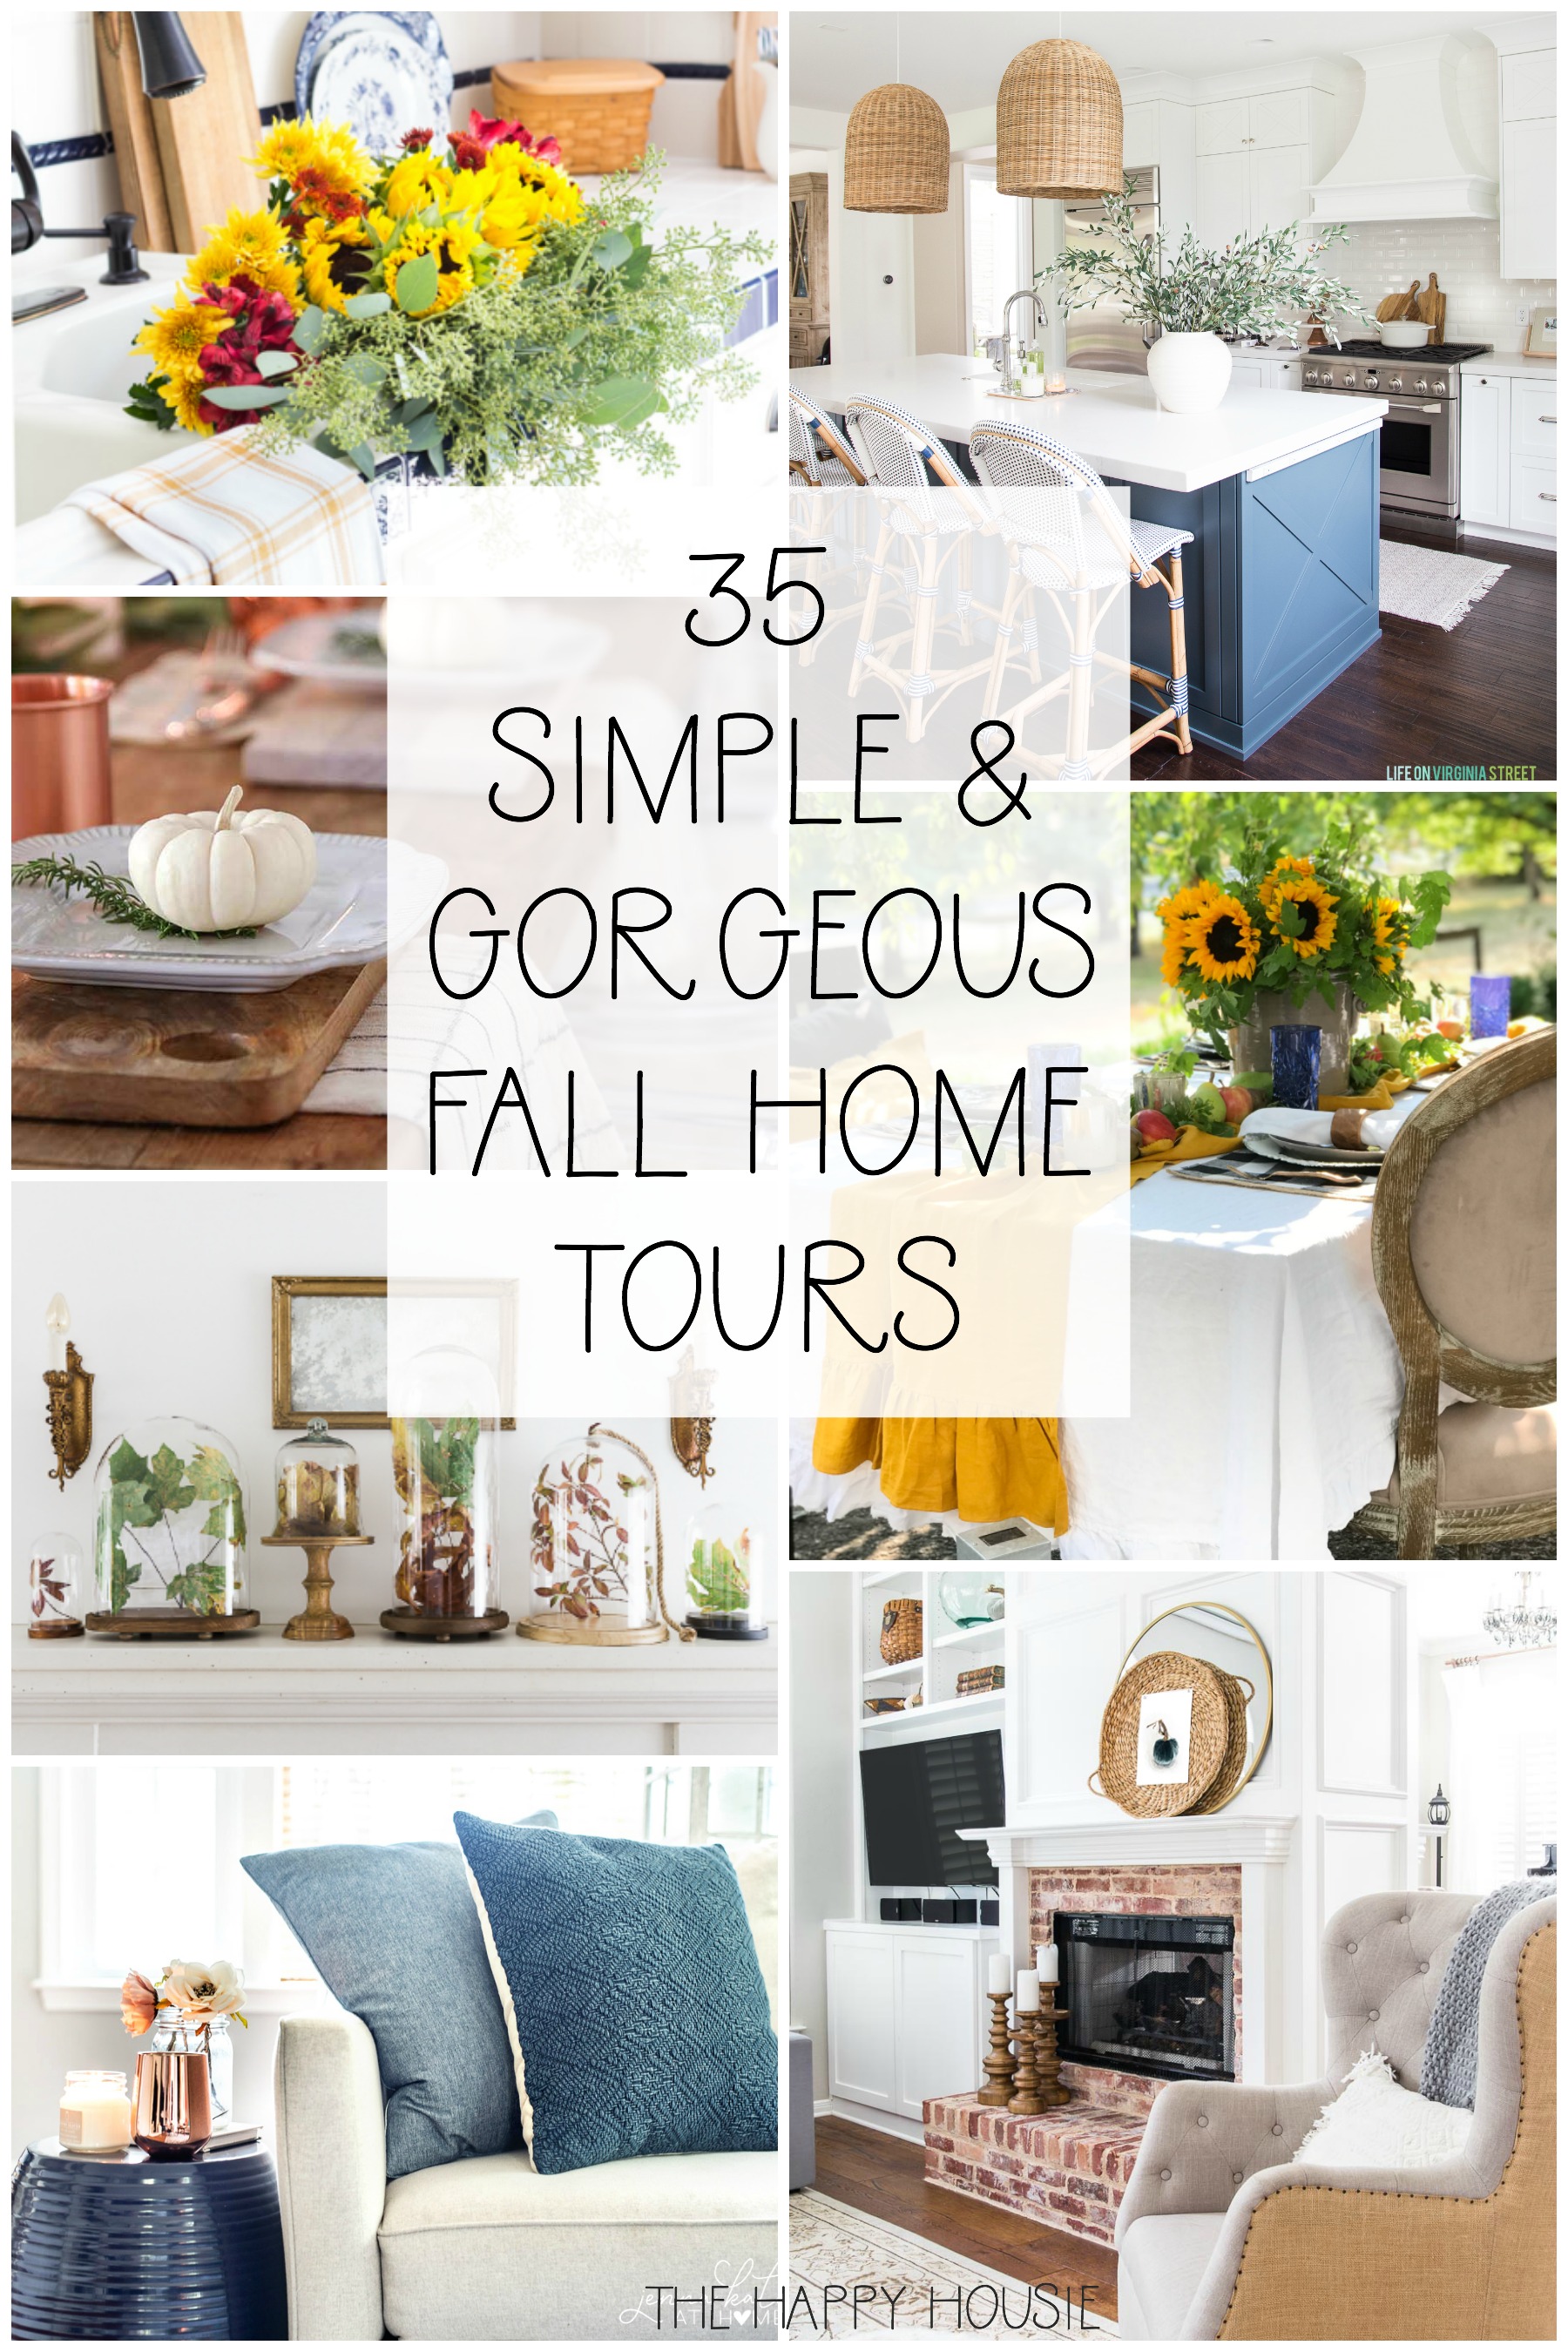 35 Simple and Gorgeous Fall Home Tours poster.